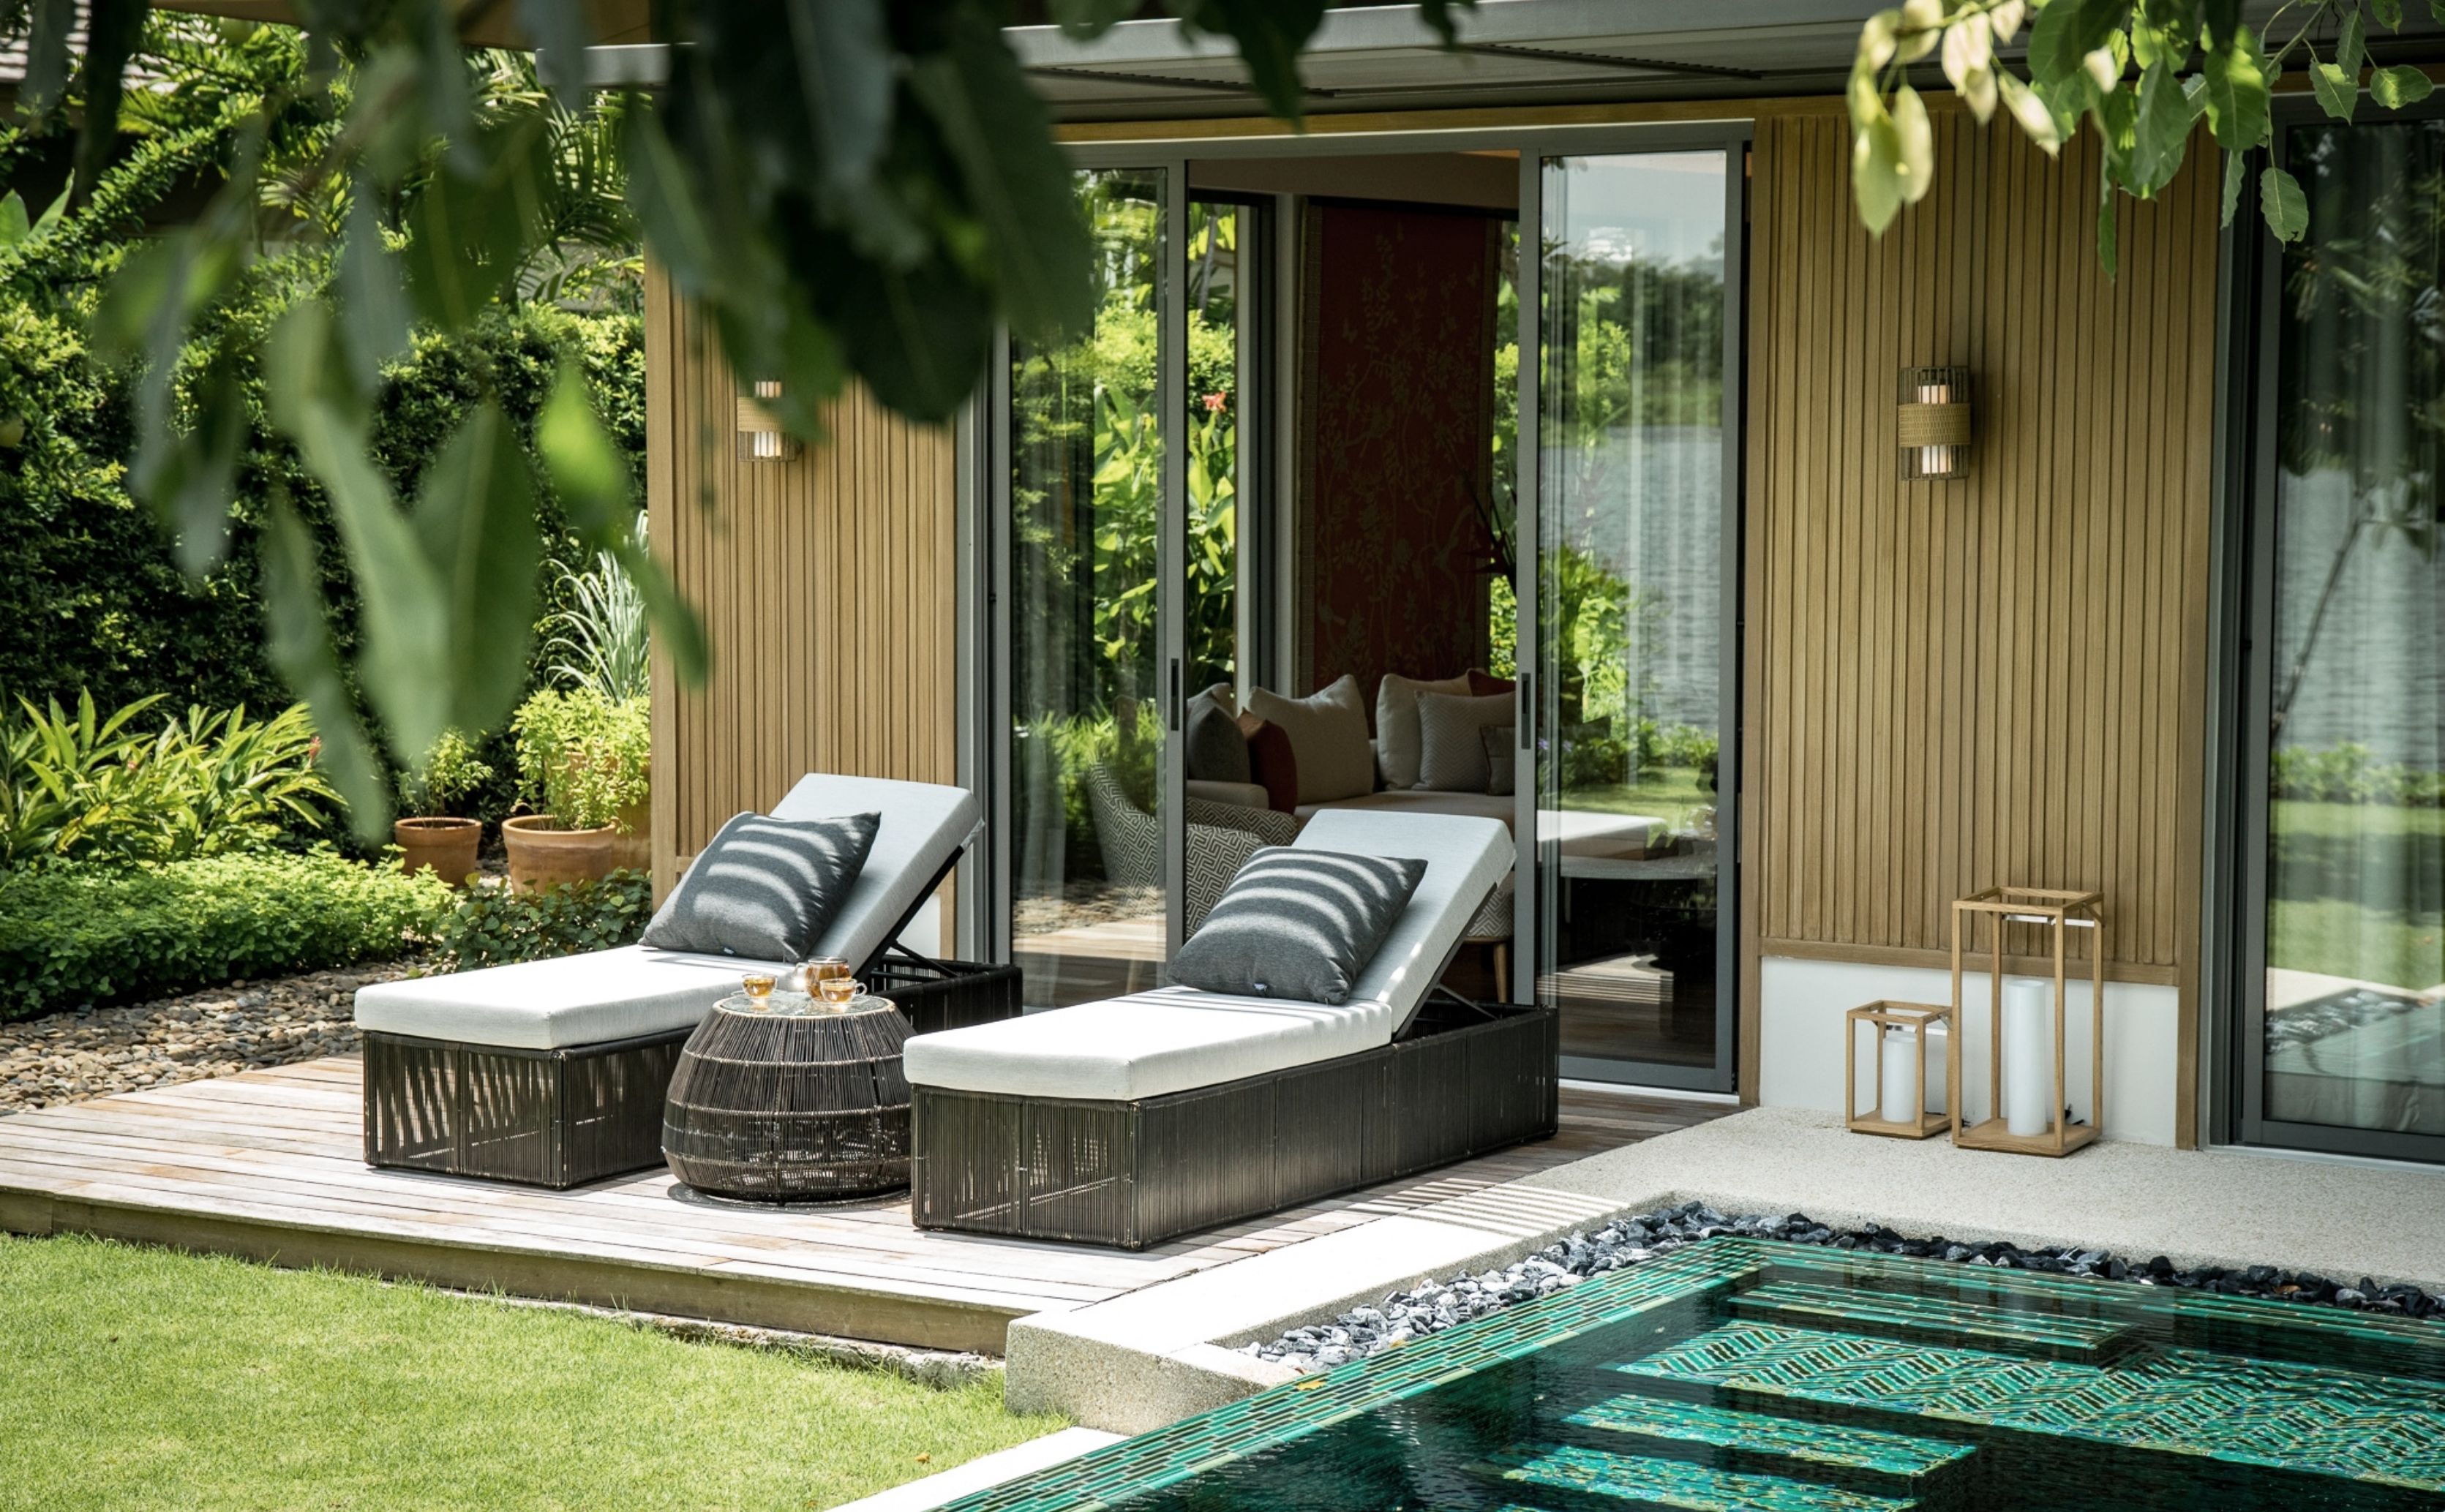 A pool villa with 2 patio lounging chairs surrounded by greenery